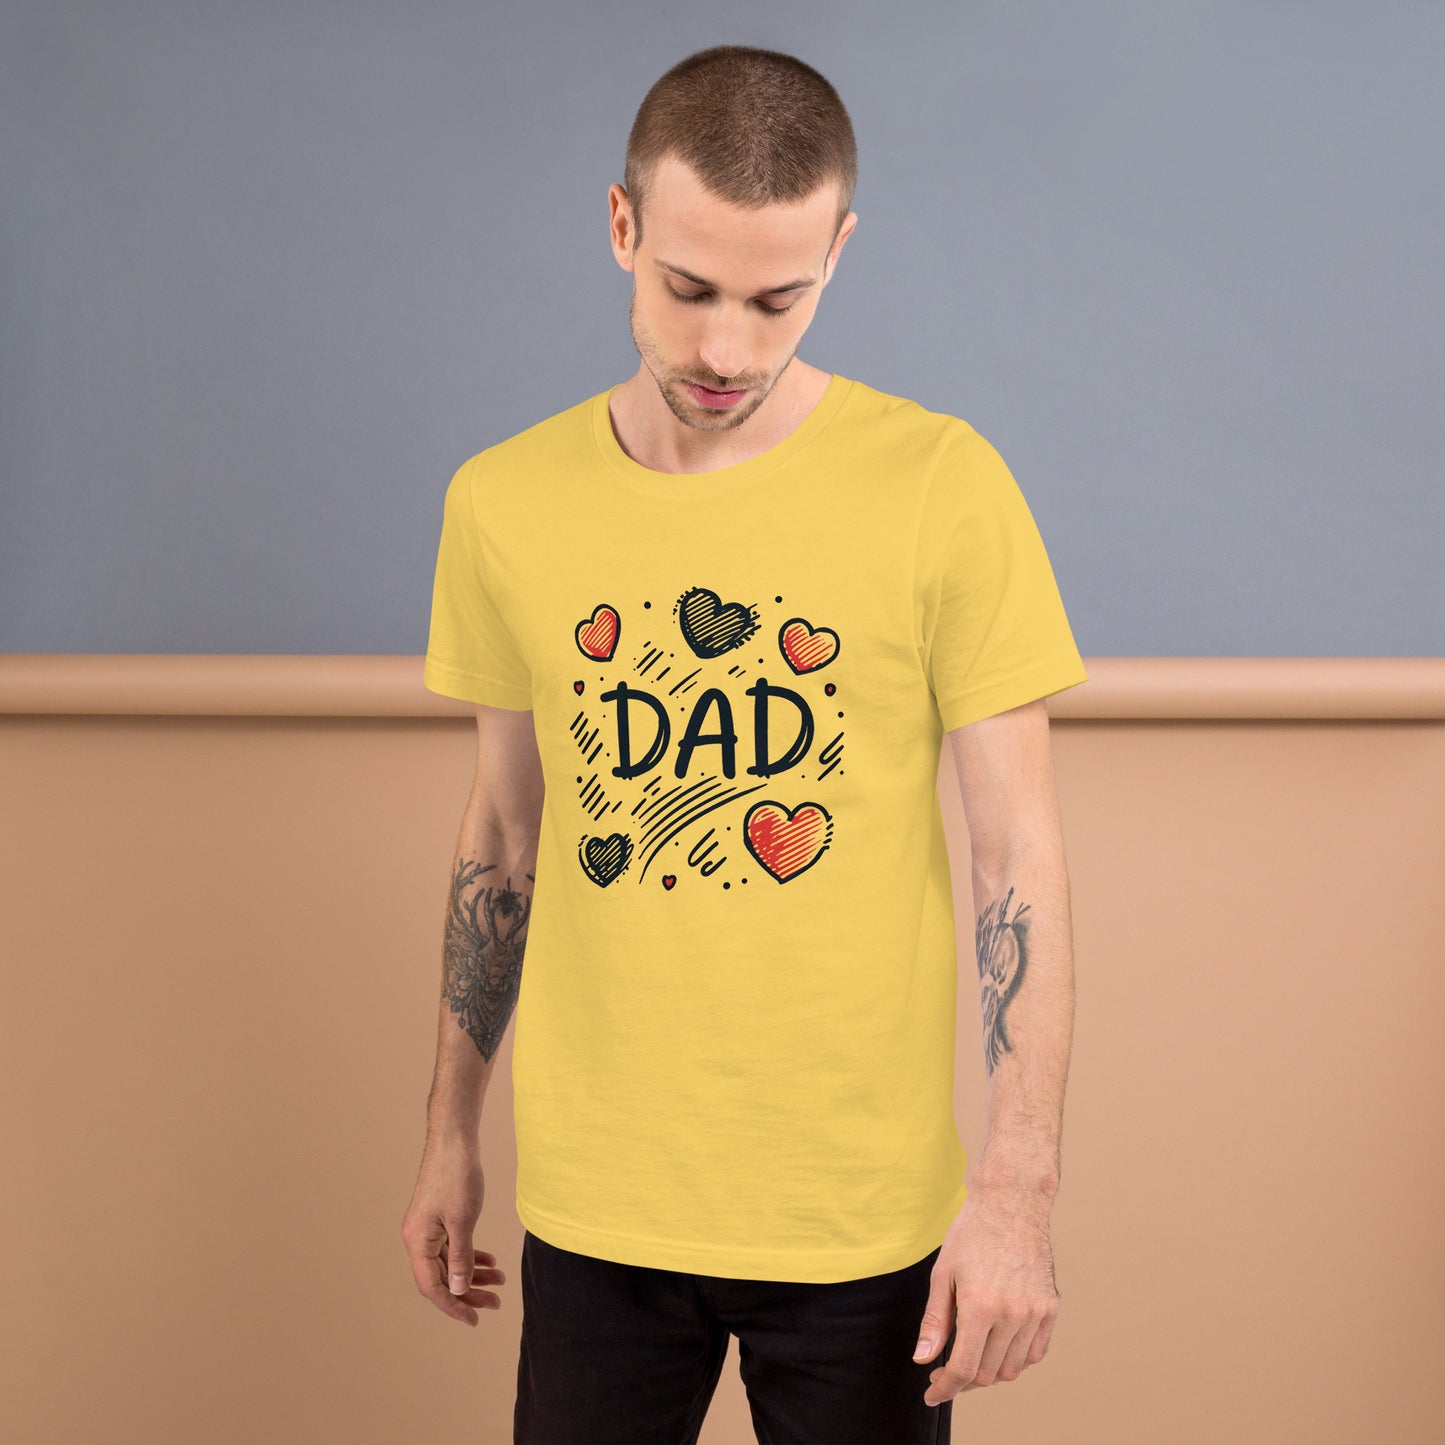 Dad with Love! Unisex t-shirt